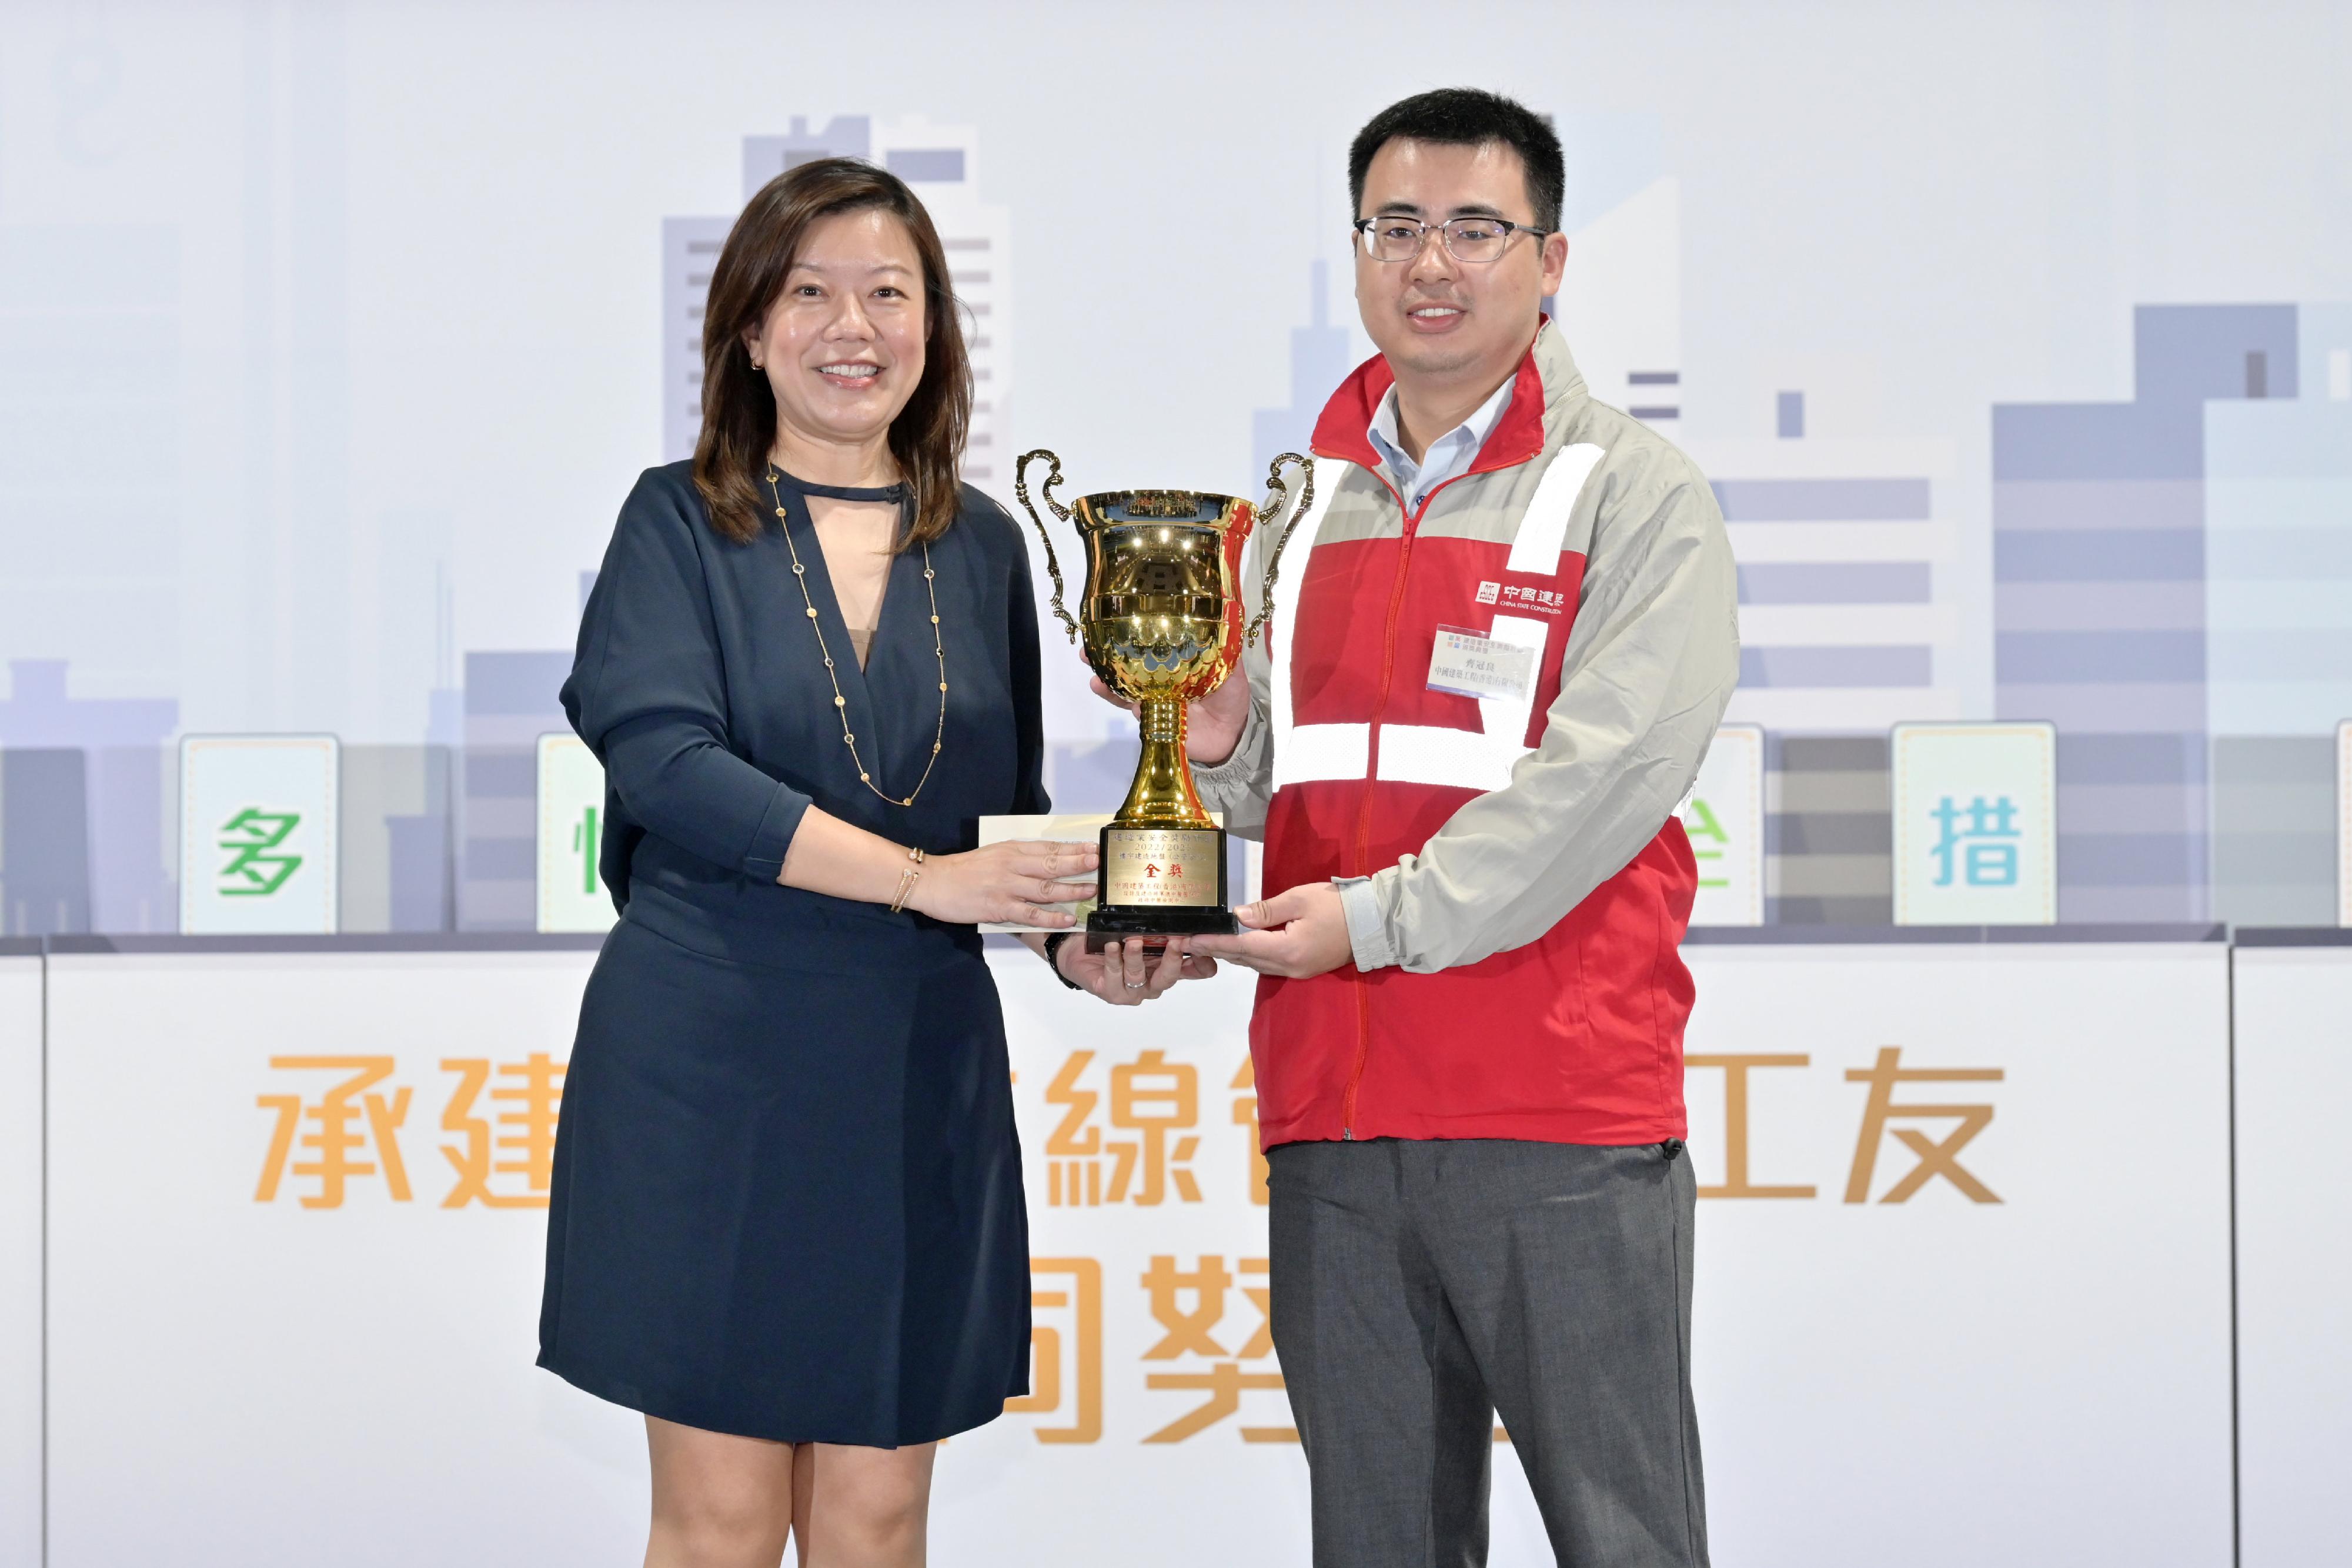 The Award Presentation Ceremony of the Construction Industry Safety Award Scheme was held at MacPherson Stadium in Mong Kok today (March 26). Photo shows the Commissioner for Labour, Ms May Chan (left), presenting an award.